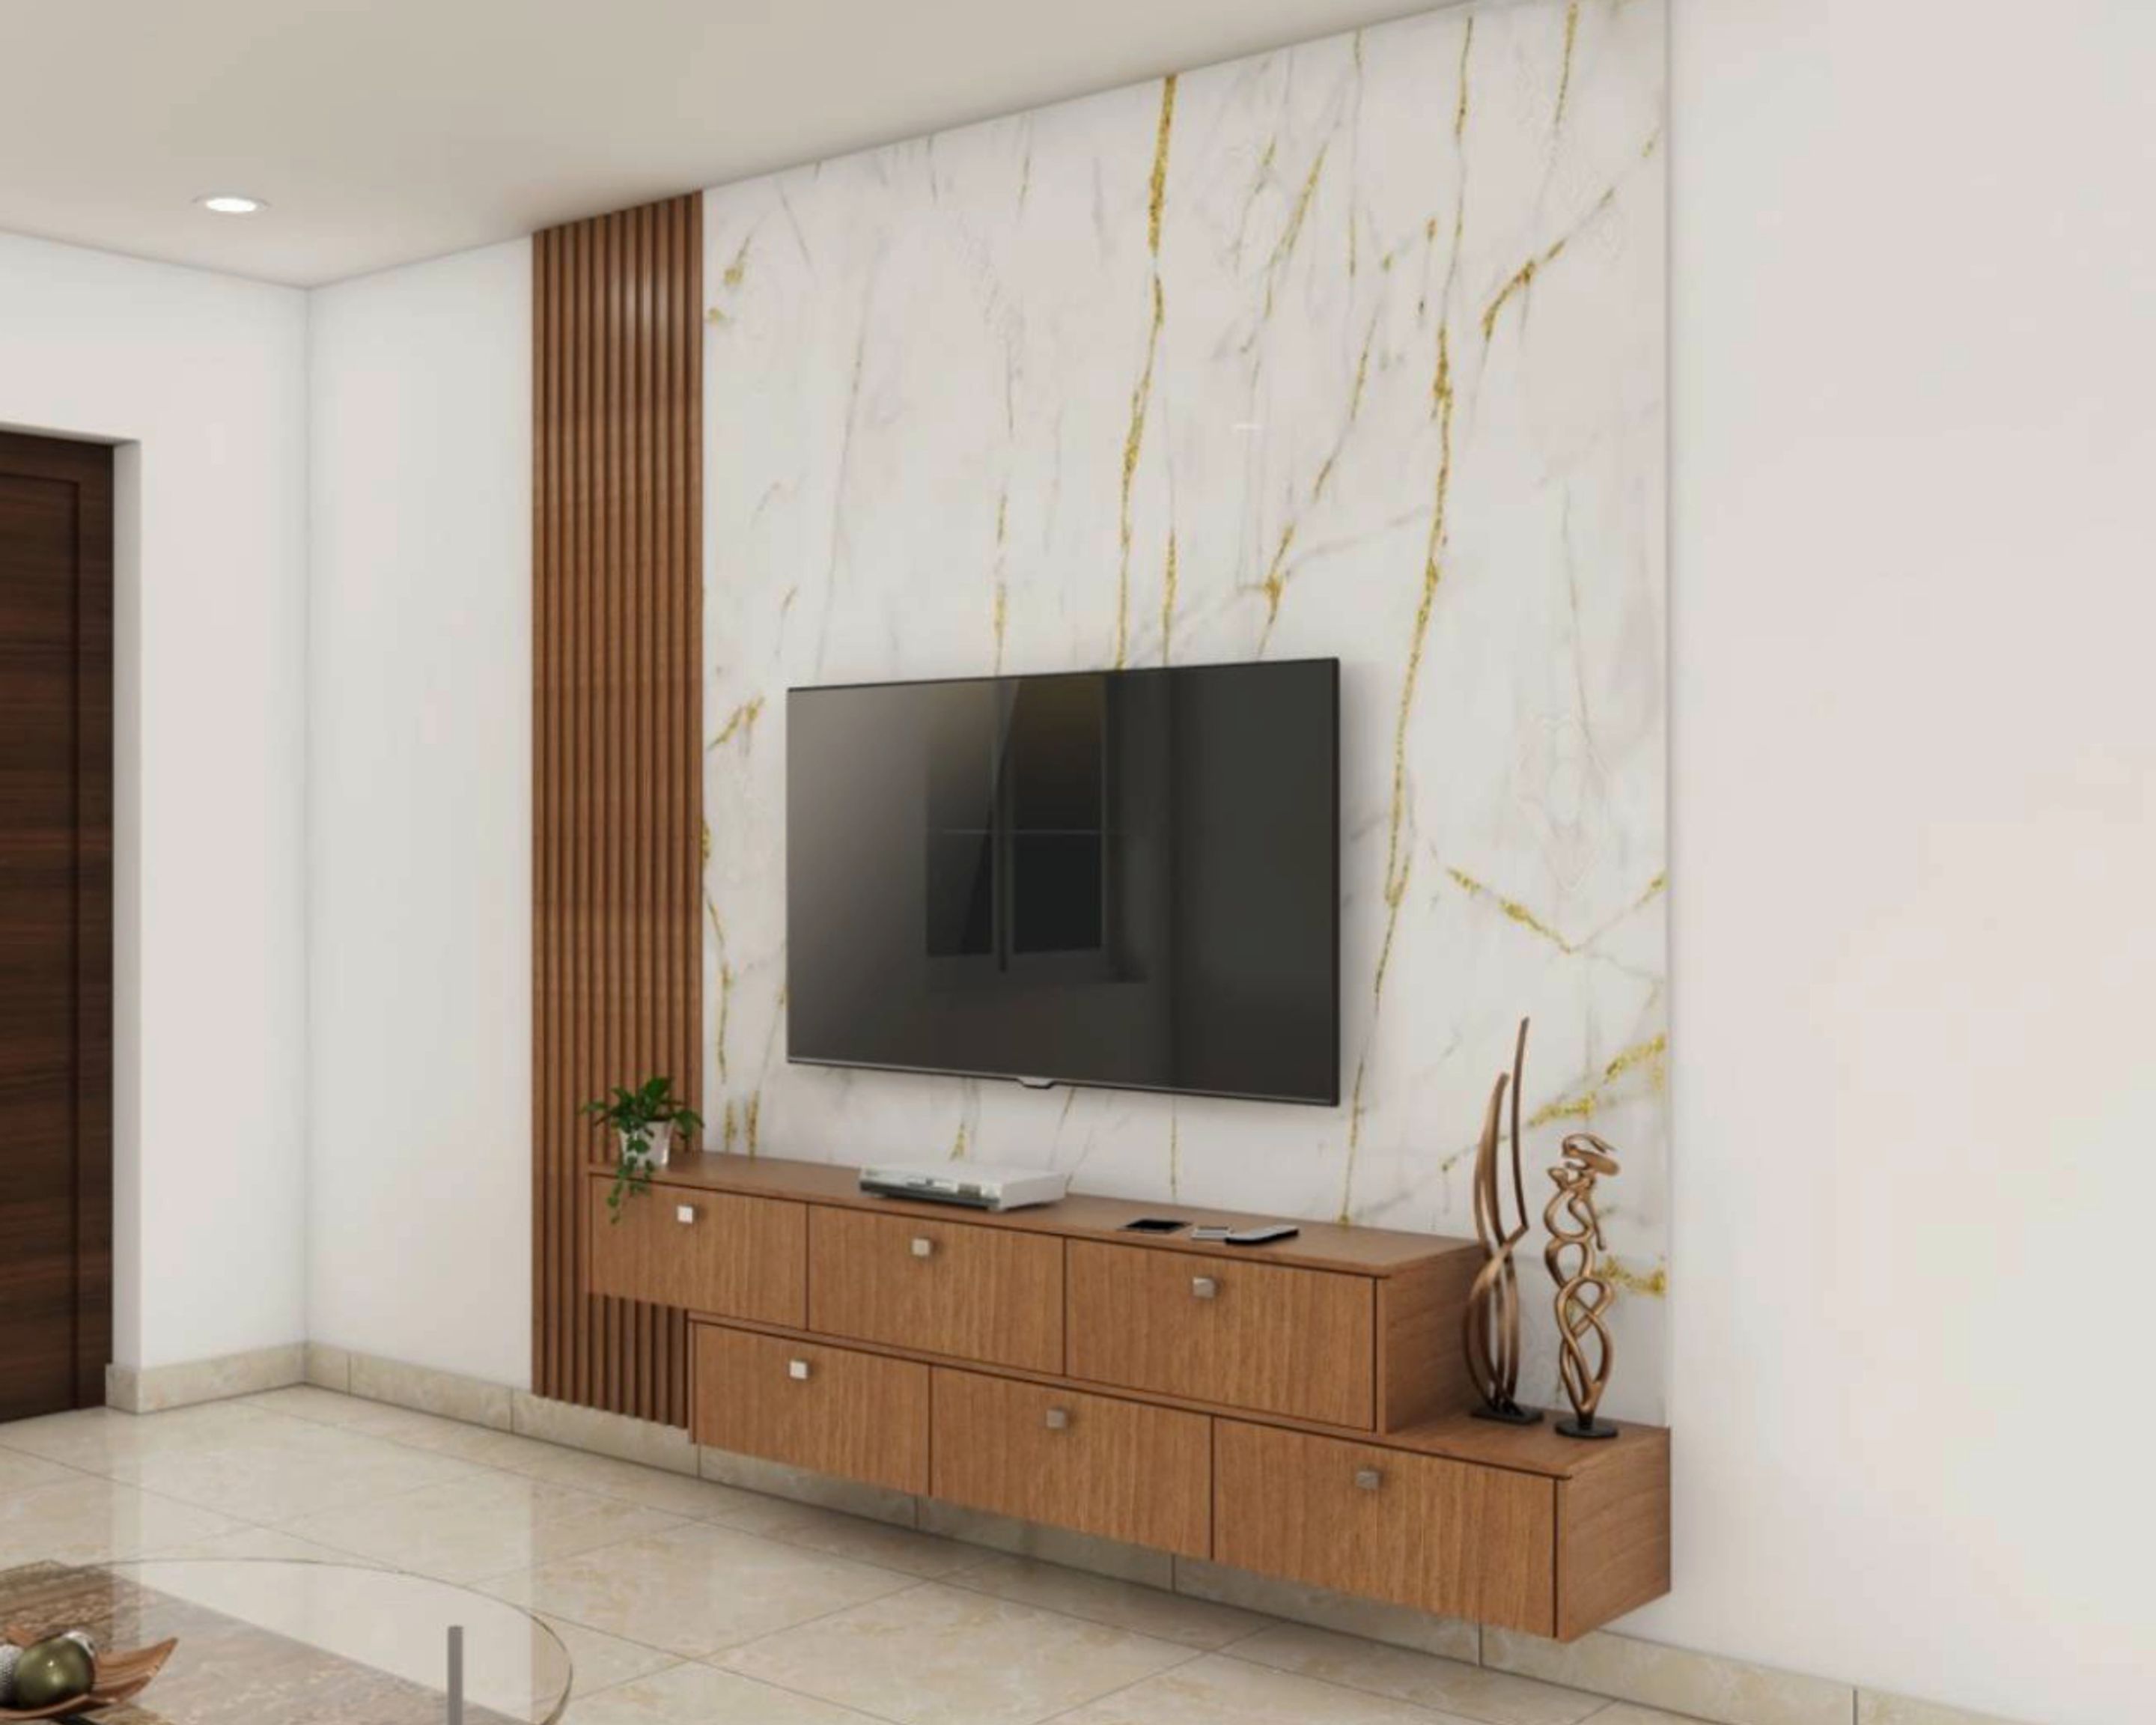 Wooden TV Unit Design With Stacked Console And Marble Backpanel | Livspace